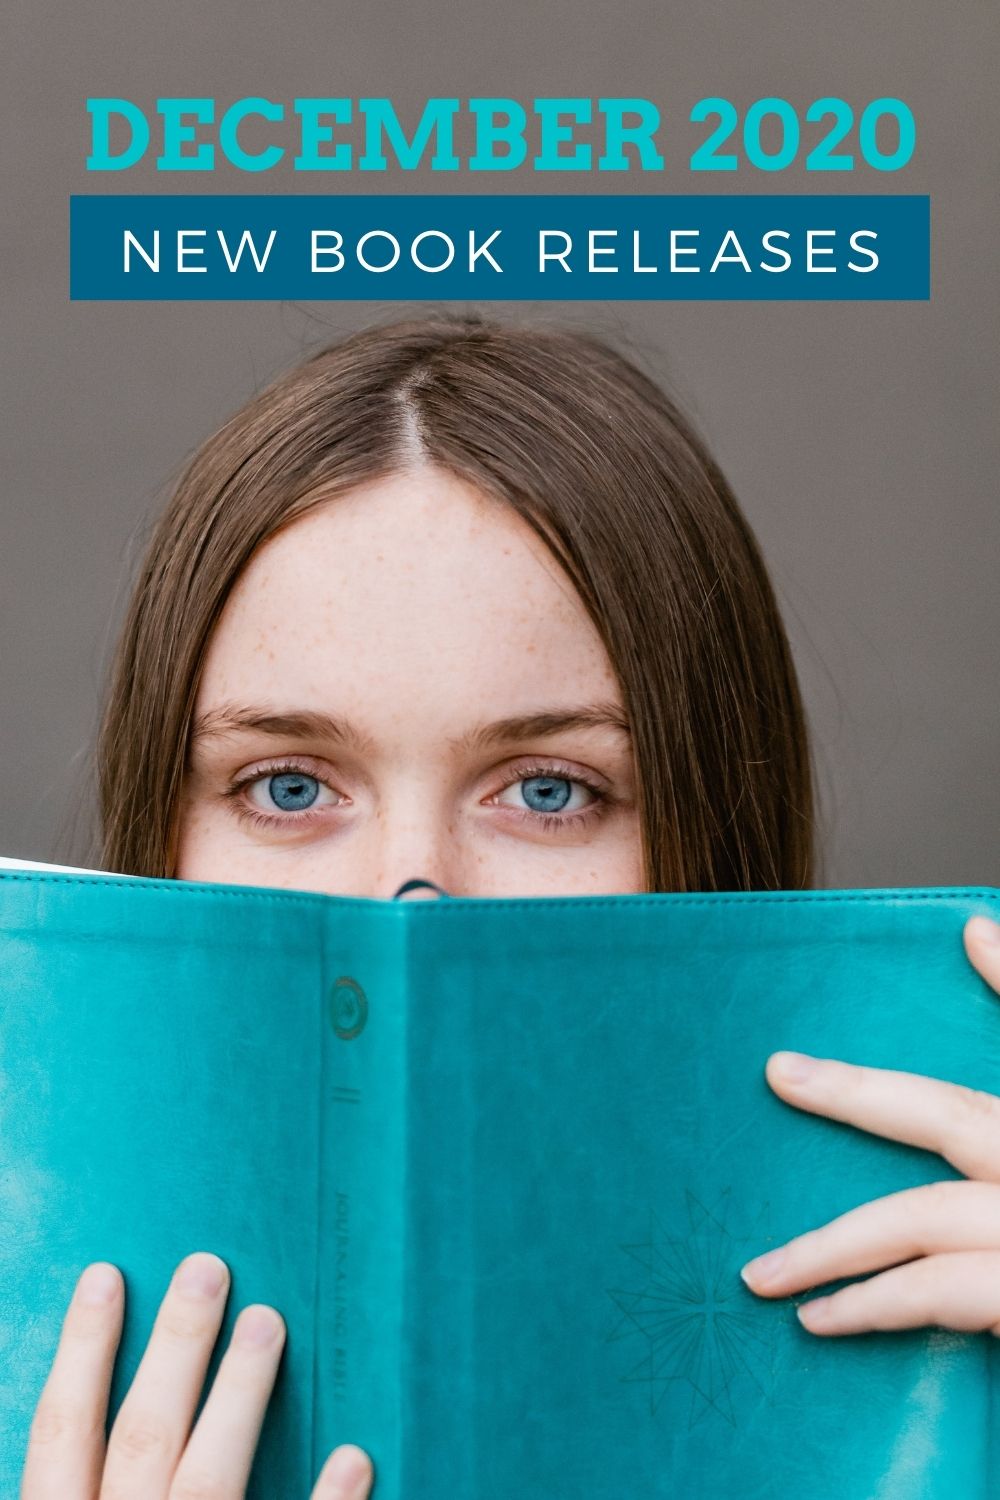 Incredible new releases coming Dec 2020. Mysteries, Historical Fiction, Fantasy and more!